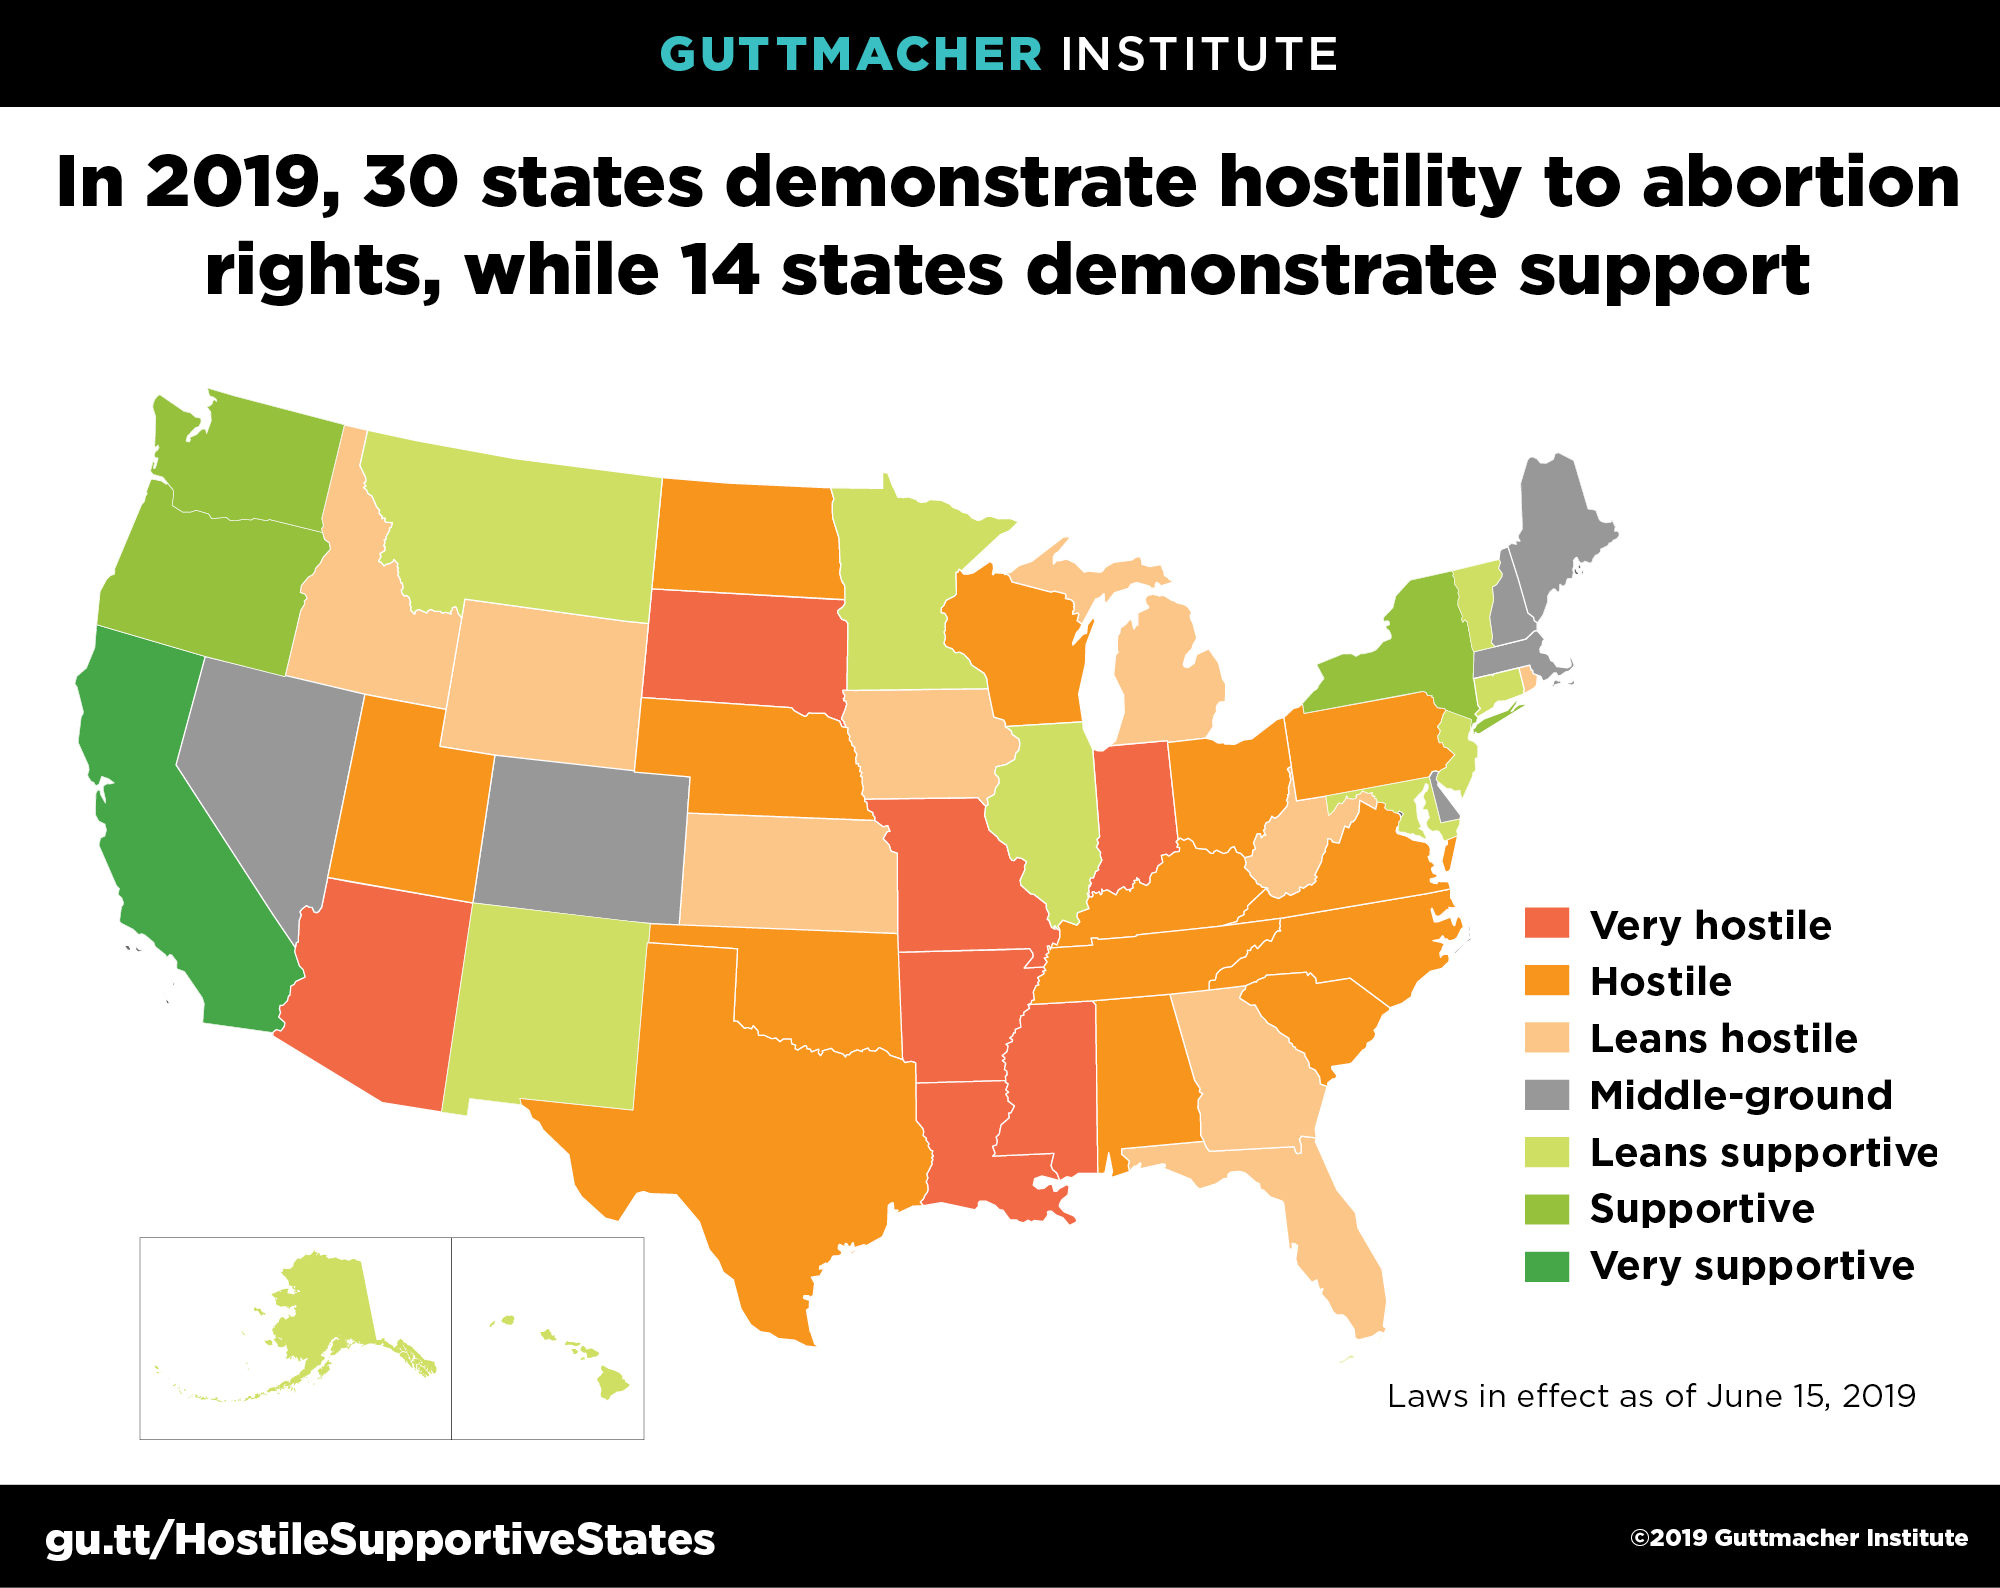 A map of the US illustrating that in 2019, 30 states demonstrate hostility to abortion rights, while 14 states demonstrate support